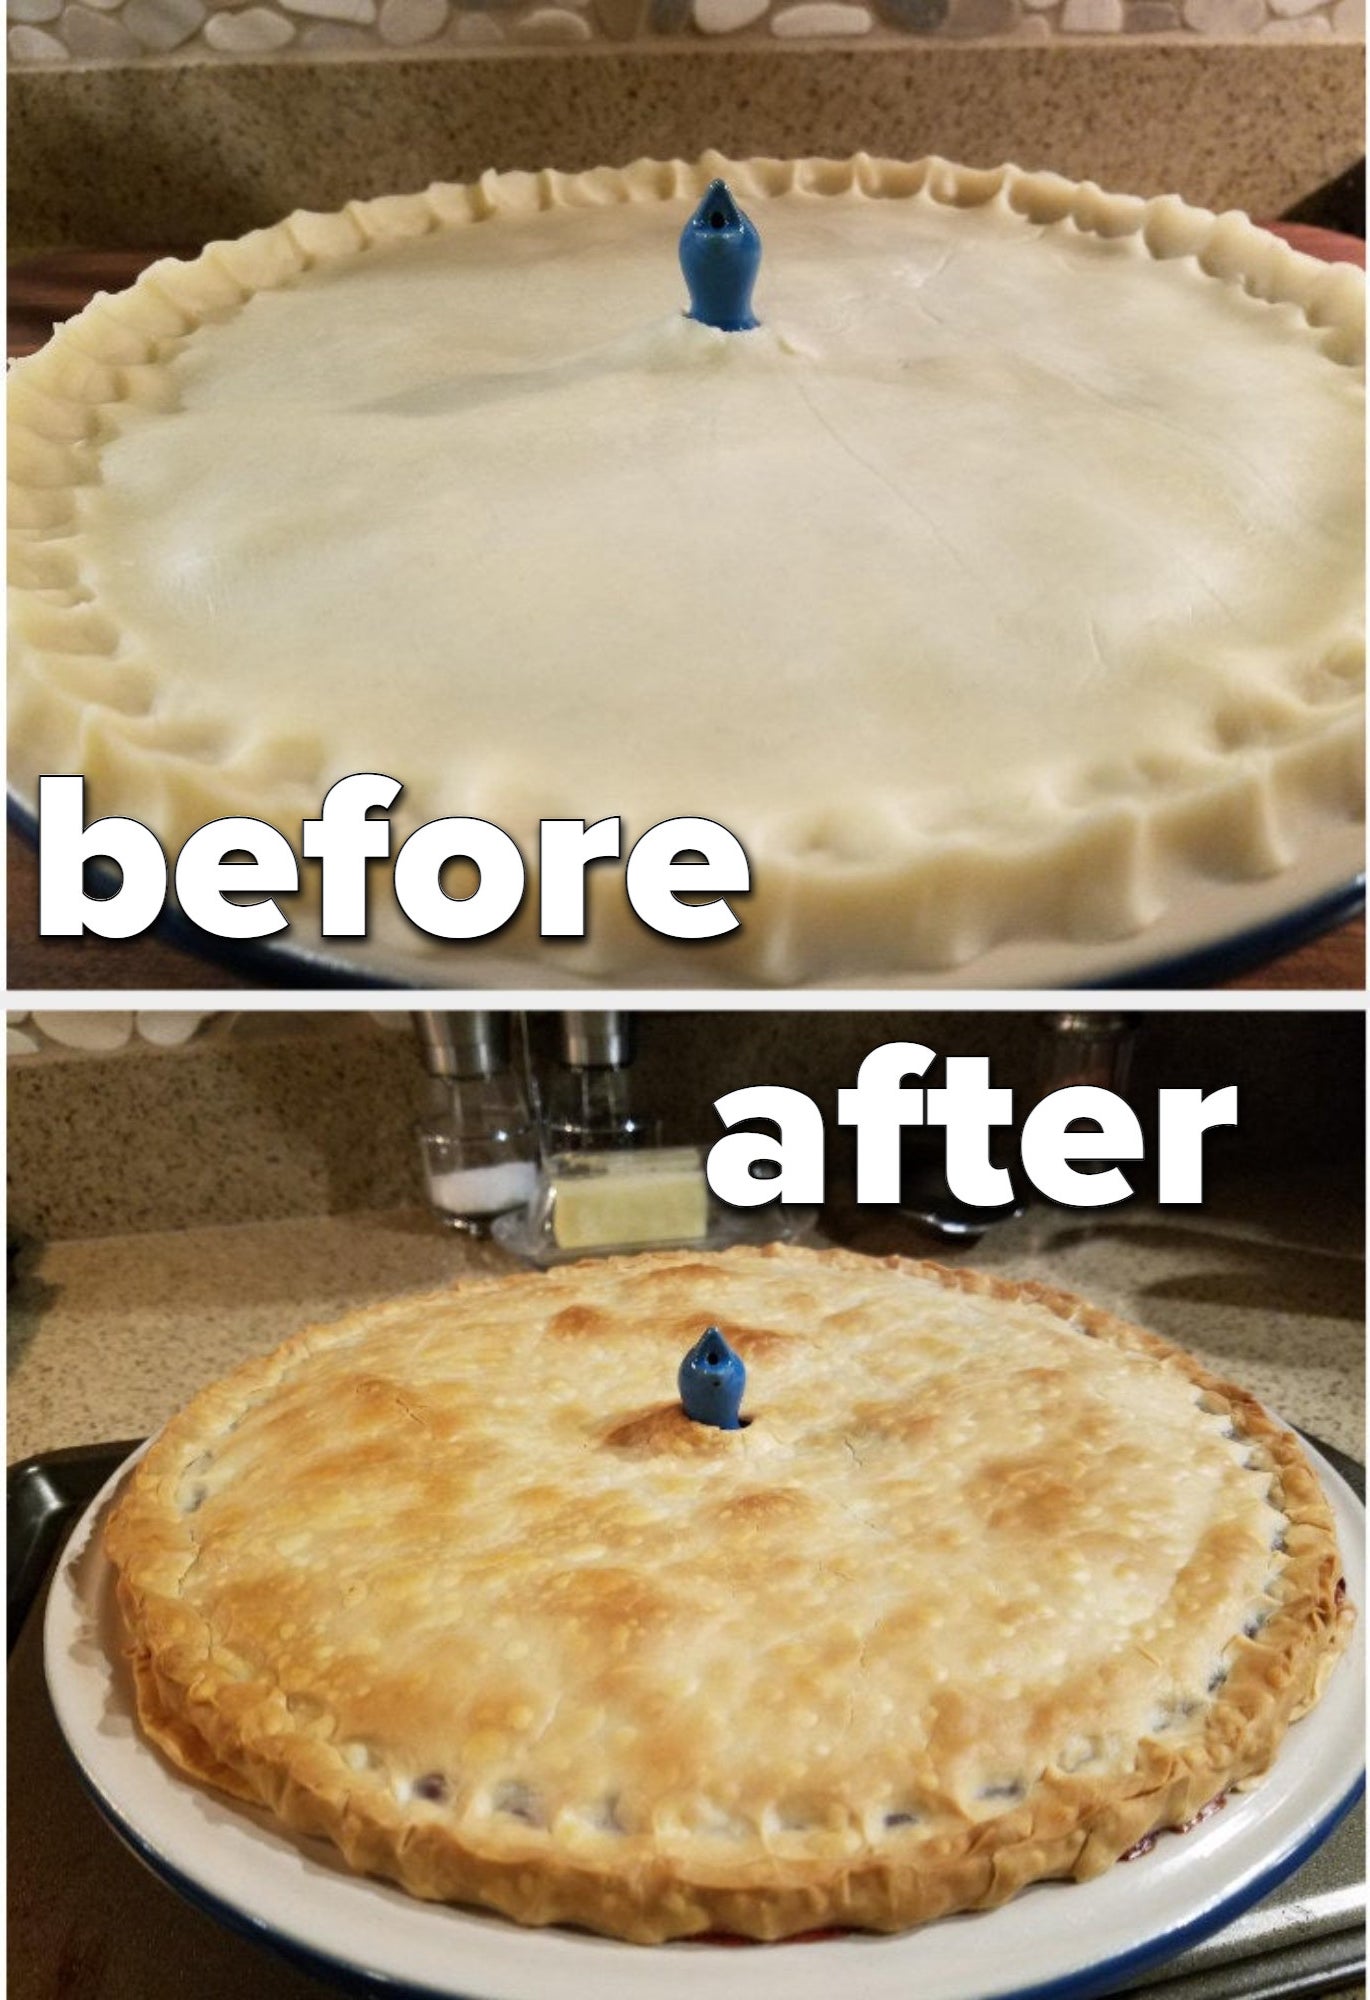 a pre cooked and cooked pie with the pie bird in the center